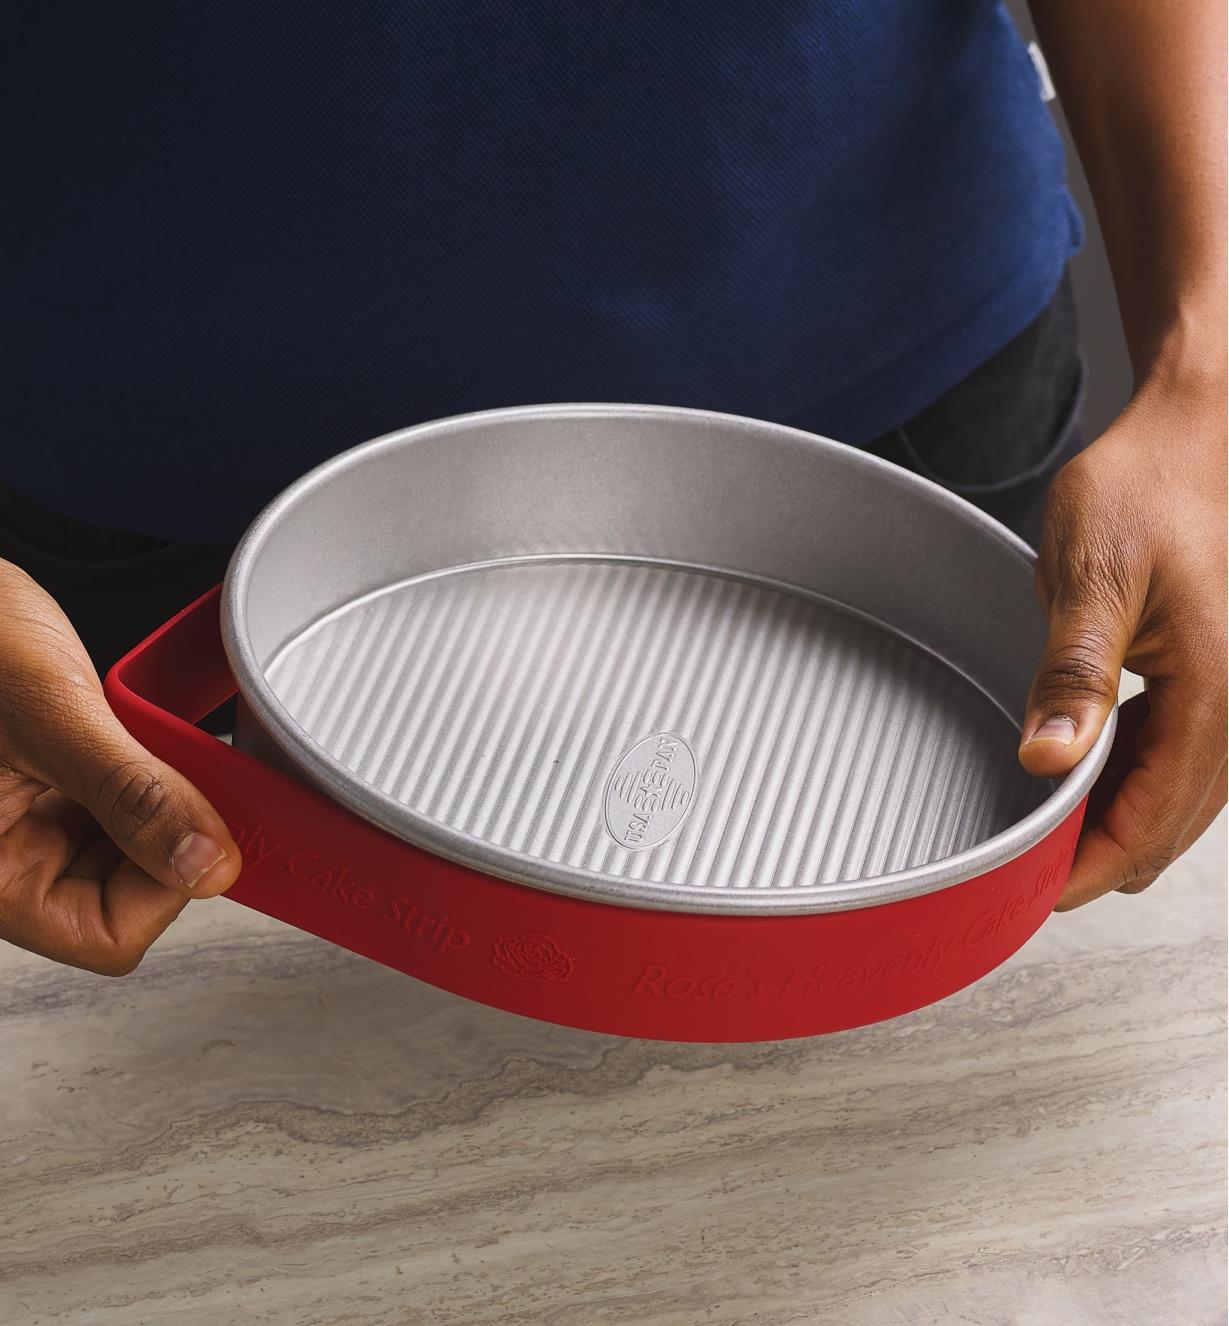 Placing a silicone cake strip around the outside of a circular cake pan